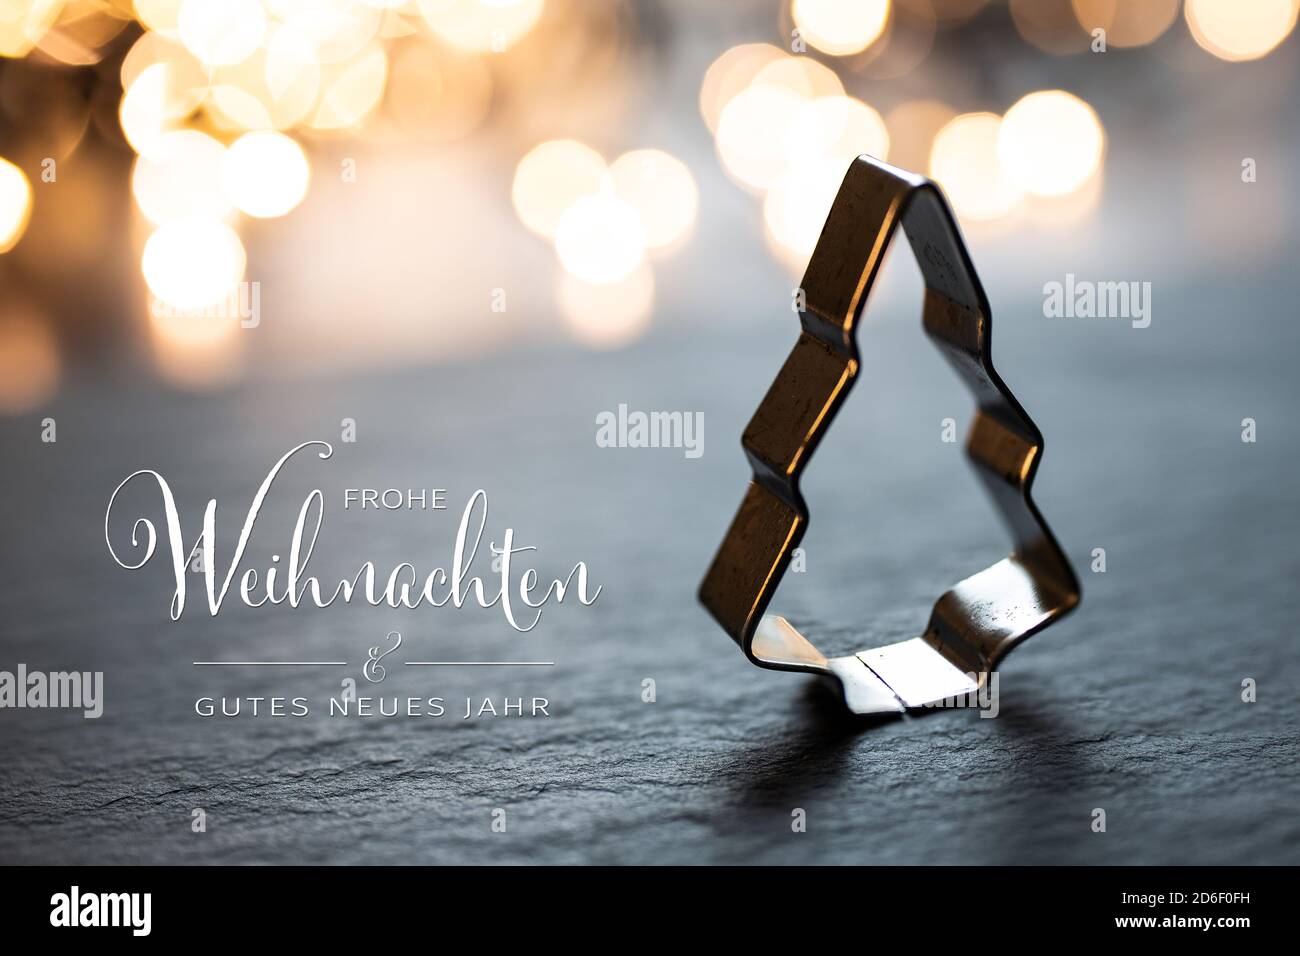 Christmas Tree Cookie cutter in front of christmas lights. Text 'Merry Christmas & Happy New Year' in German 'Frohe Weihnachten & Gutes Neues Jahr' to Stock Photo